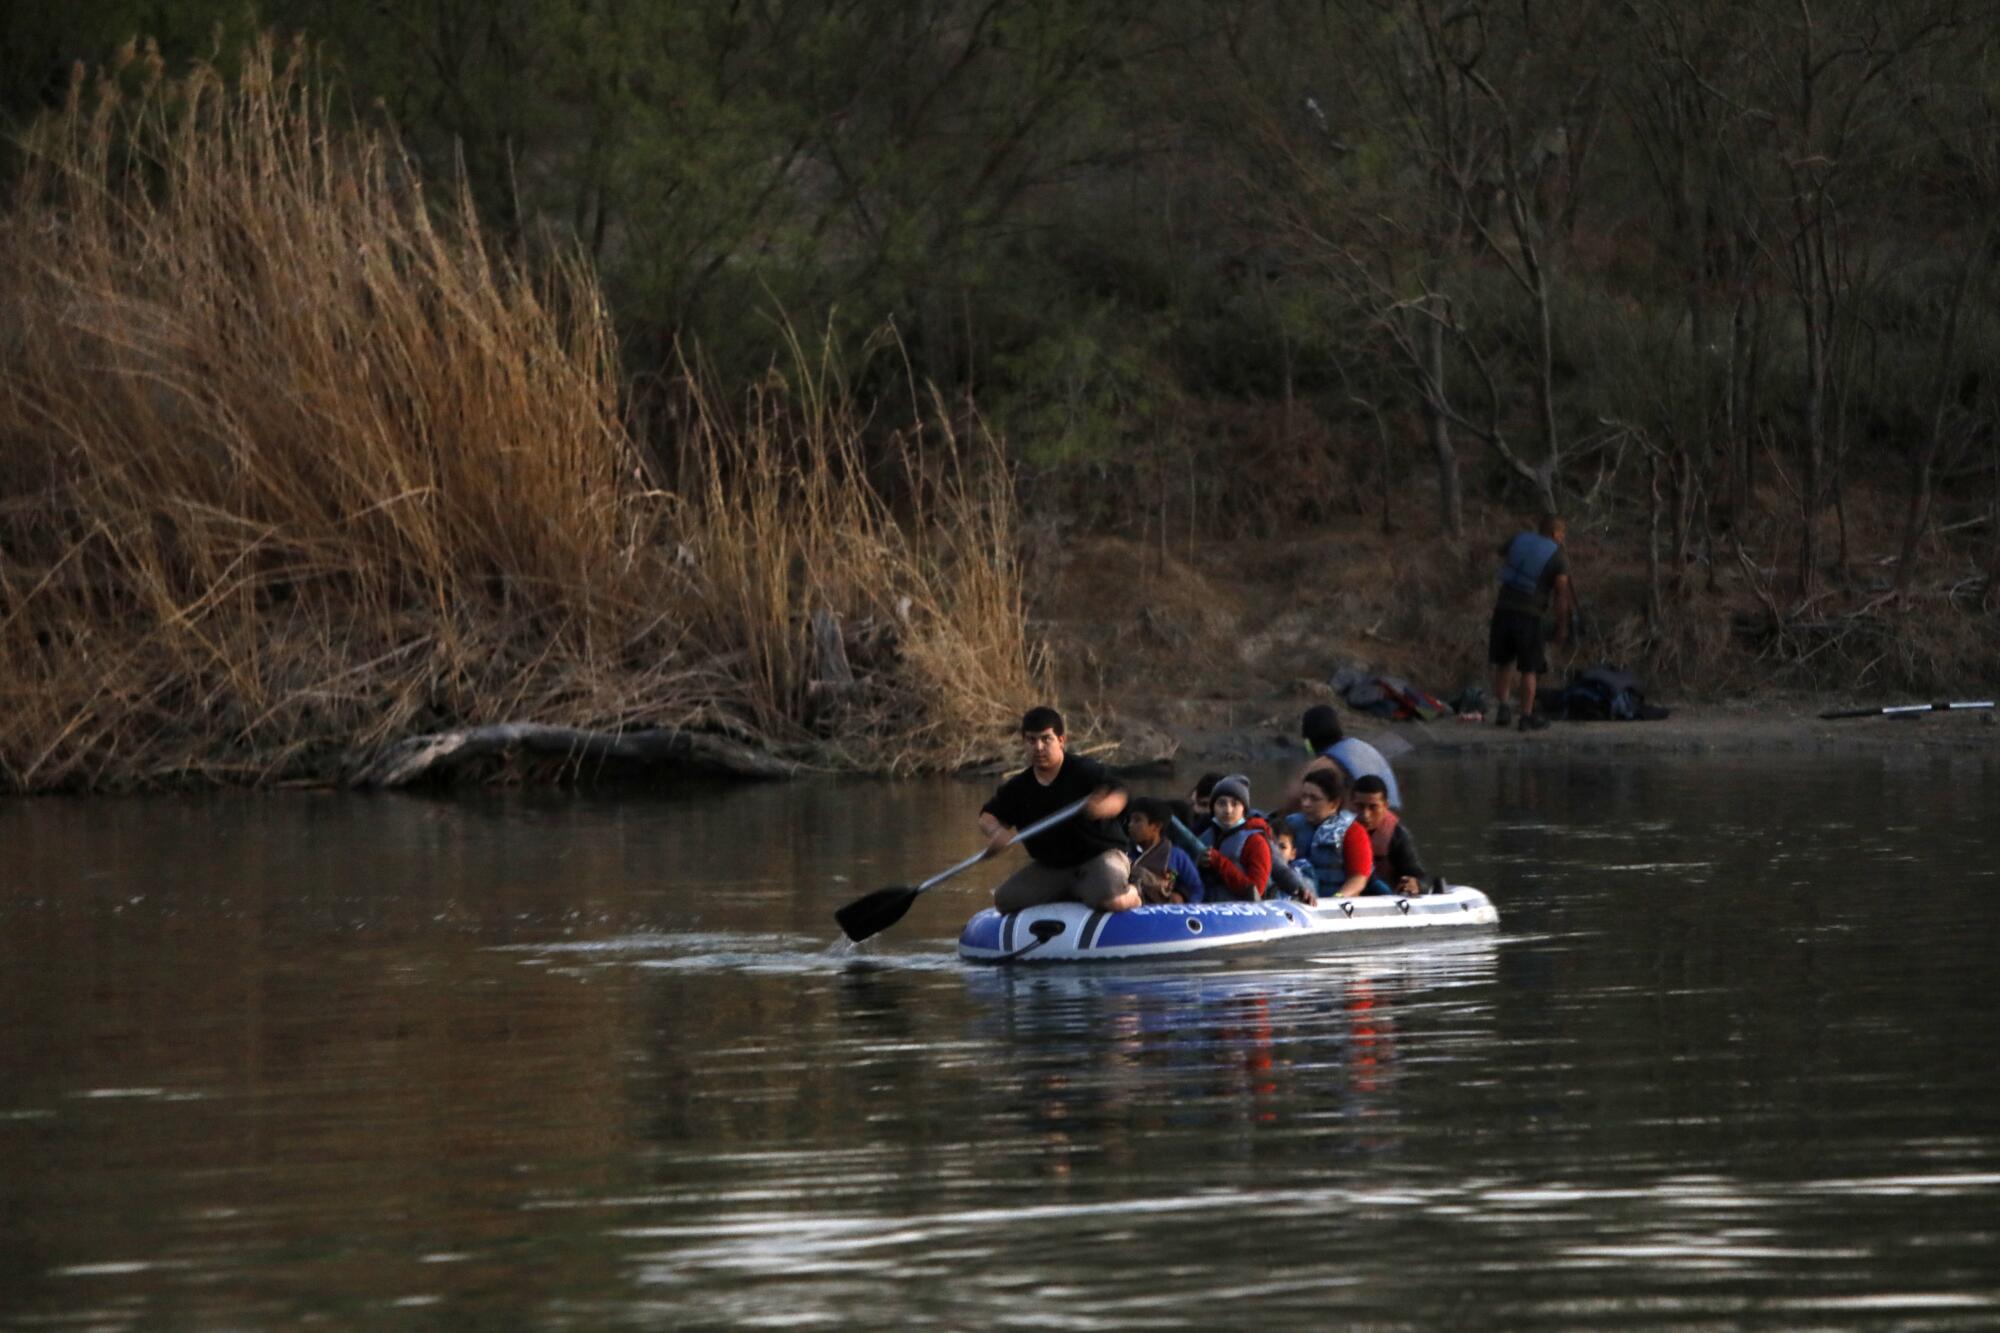 Asylum seekers are transported across the Rio Grande by smugglers on a raft 